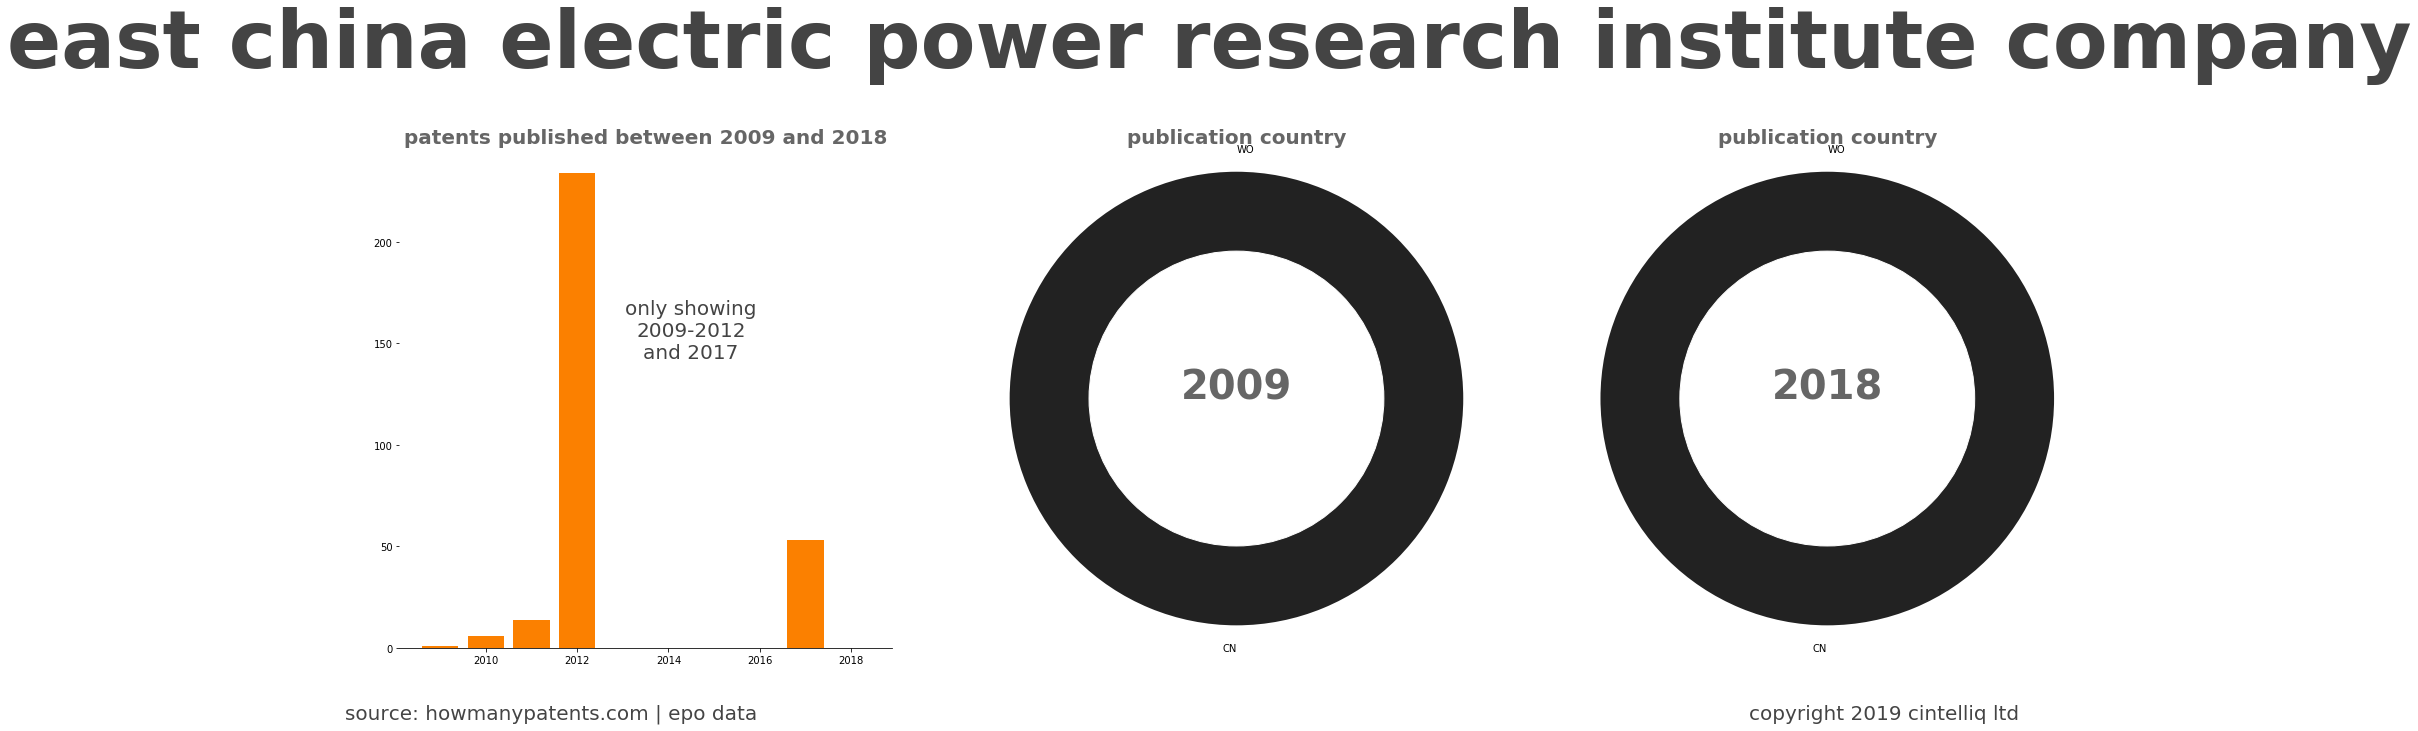 summary of patents for East China Electric Power Research Institute Company